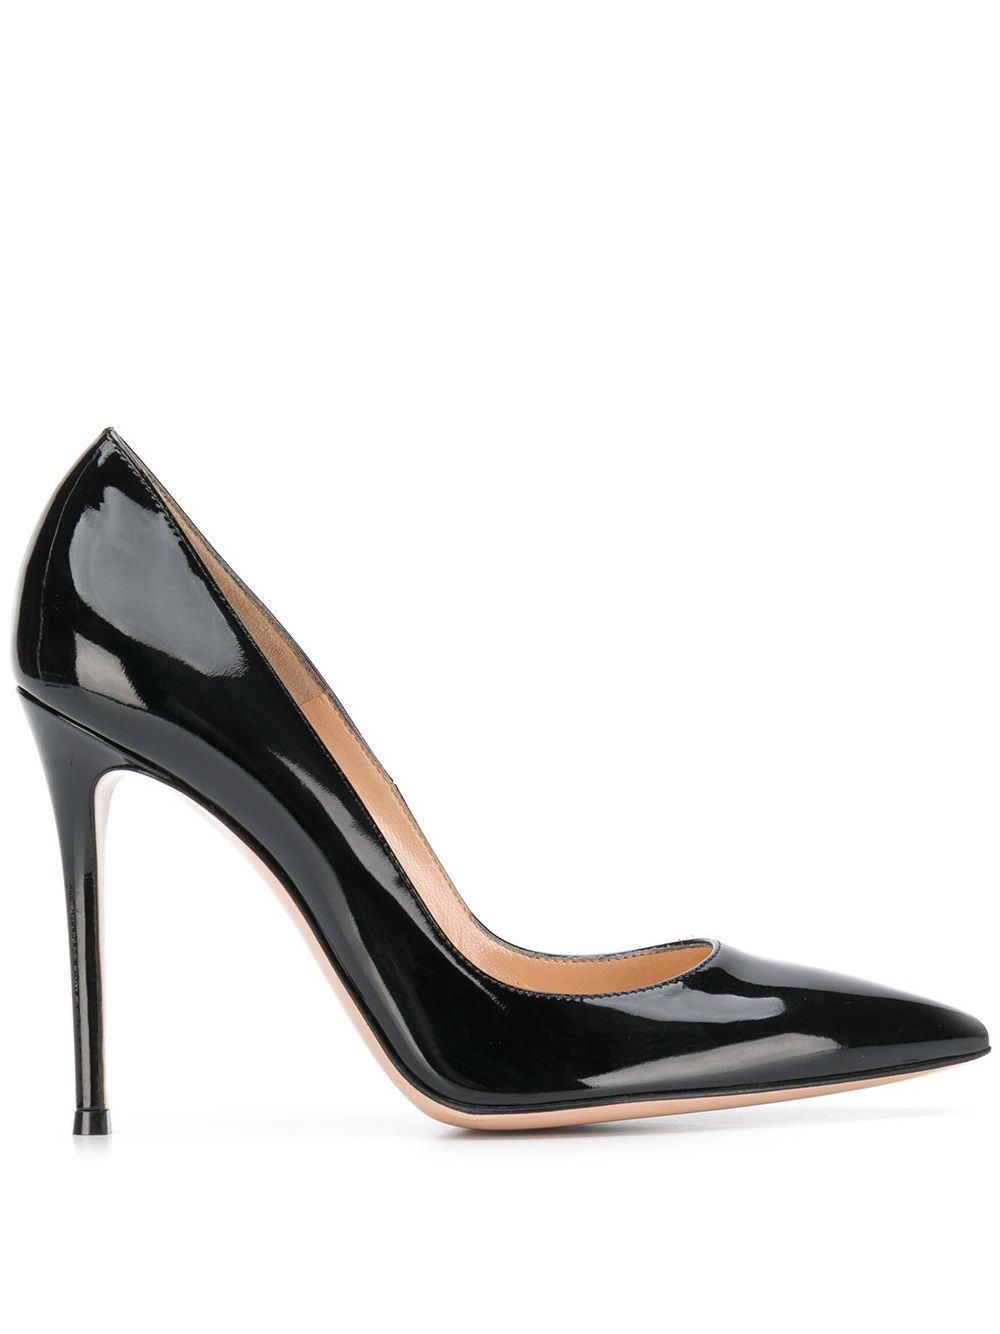 Gianvito Rossi Pointed Court Shoes - Farfetch